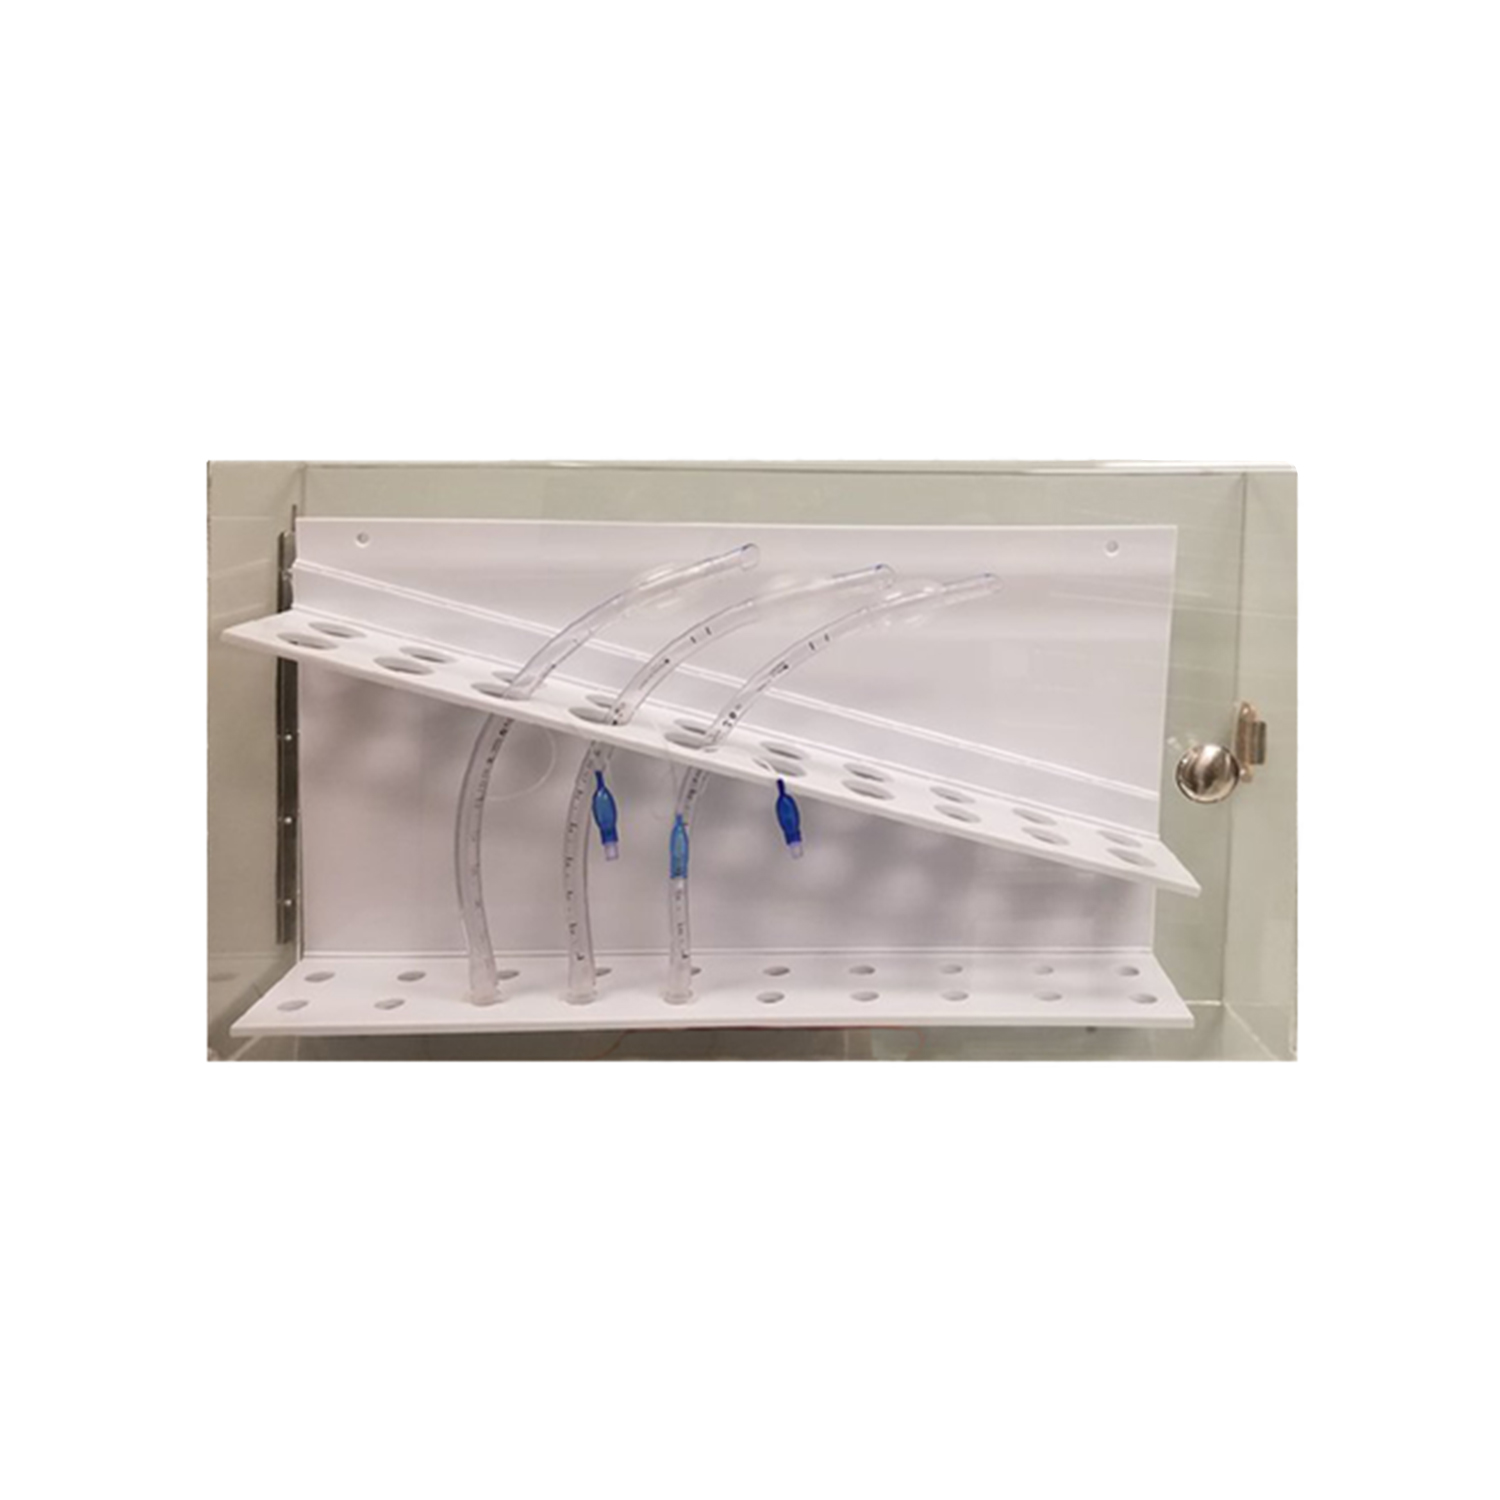 Endotracheal Tube Rack and Cover